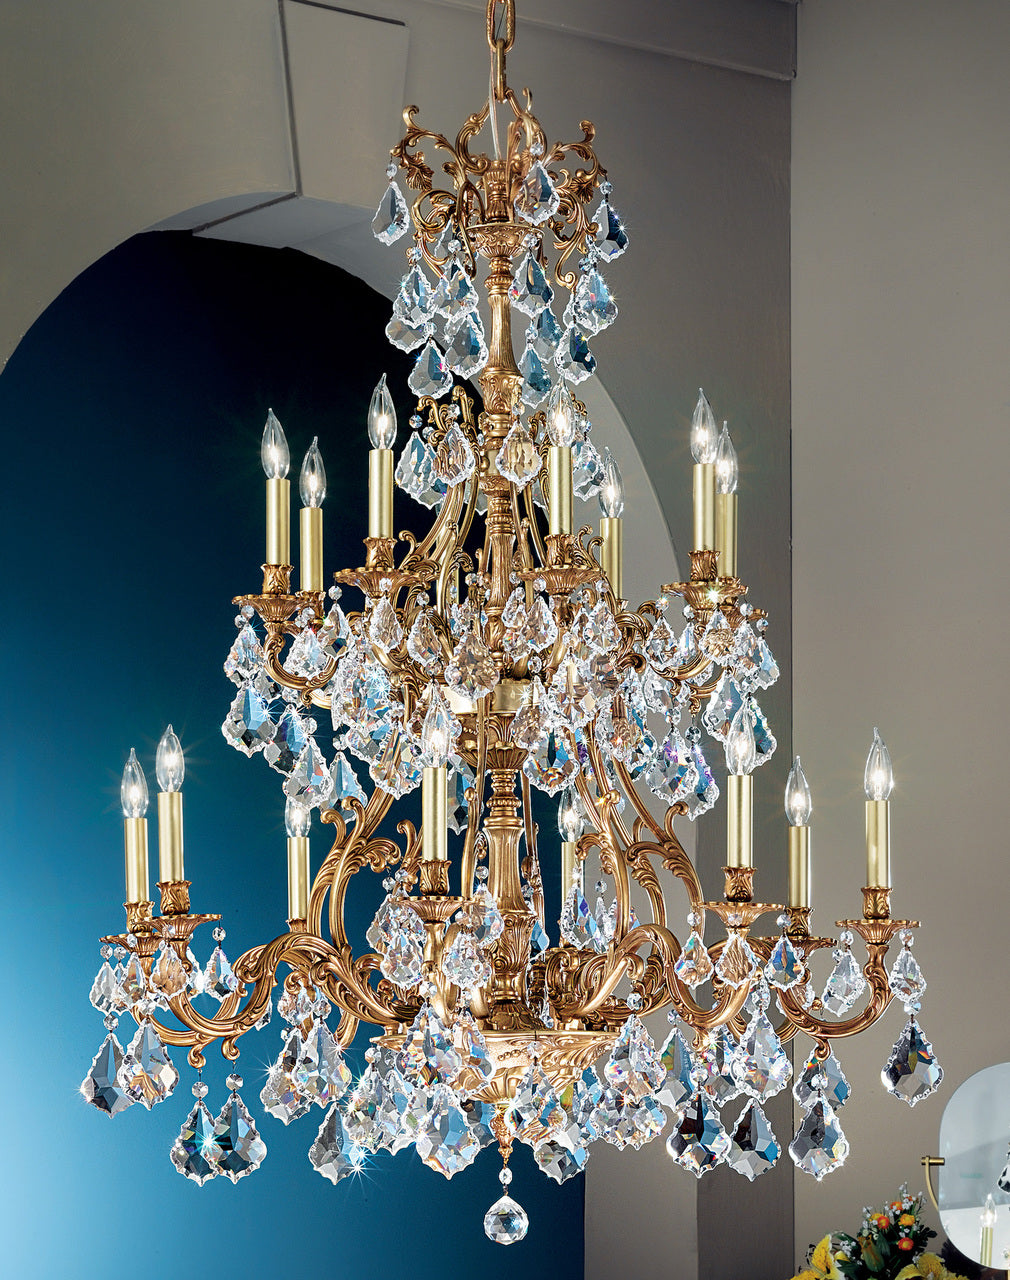 Classic Lighting 57347 FG S Majestic Crystal Chandelier in French Gold (Imported from Spain)